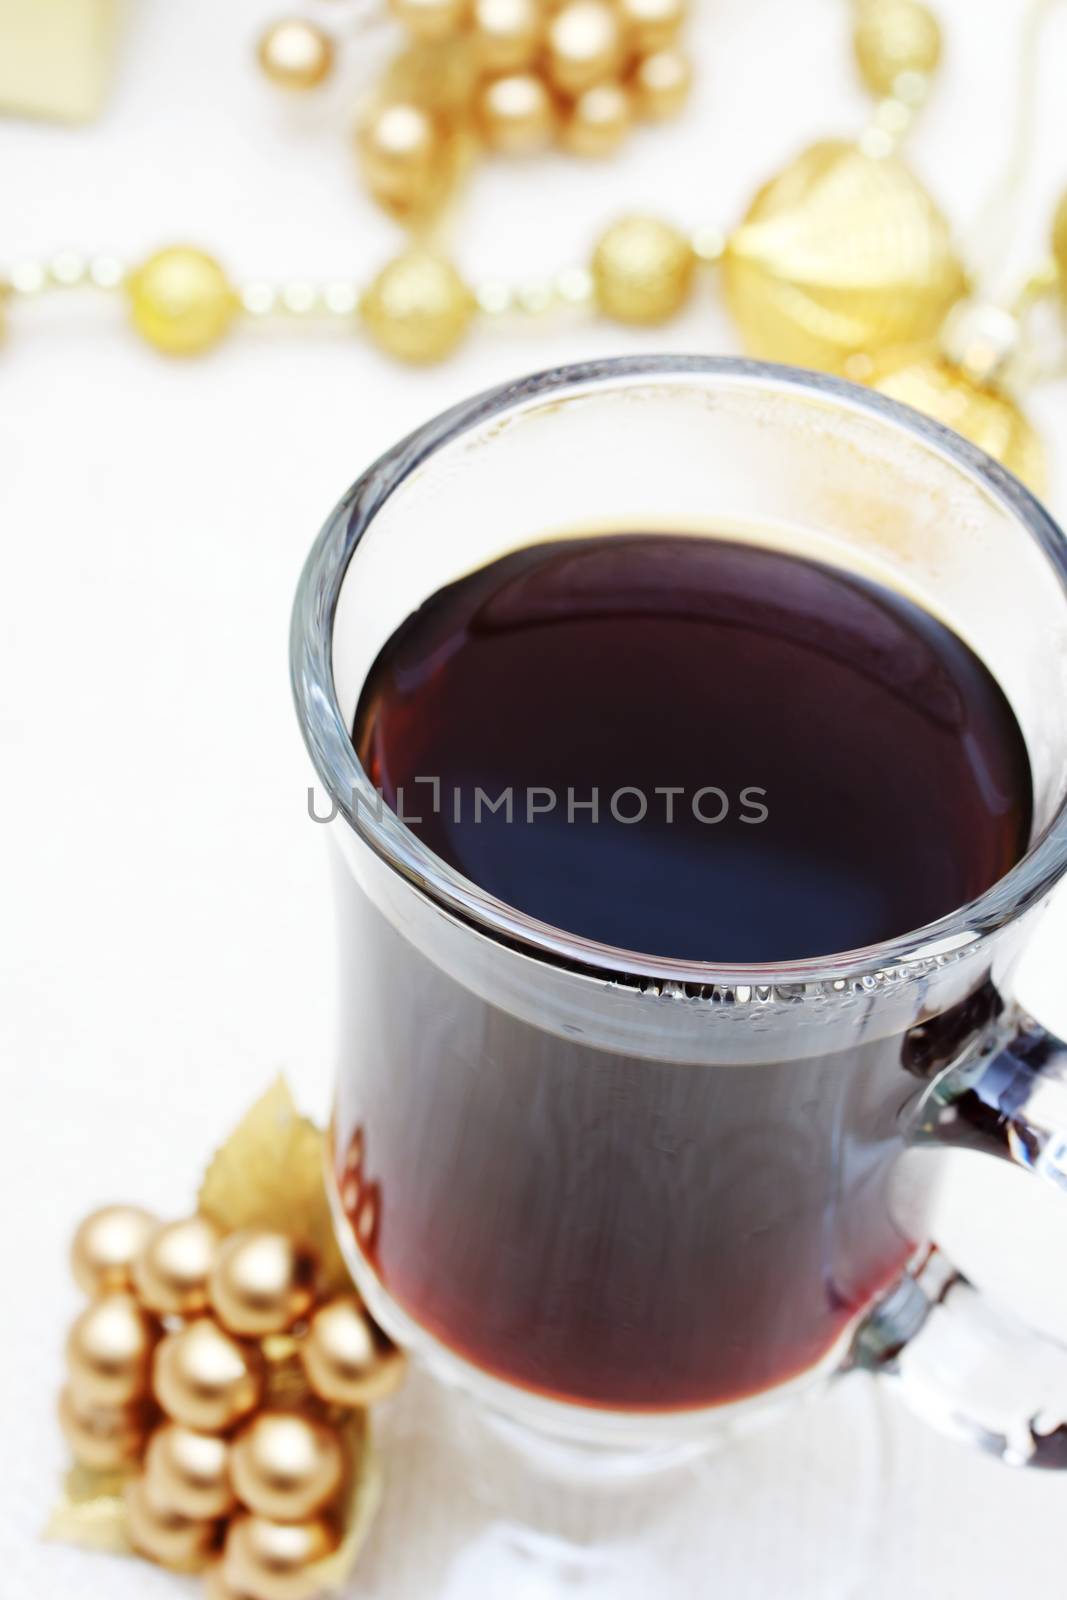 Cup of Coffee with Christmas Ornaments and Beads